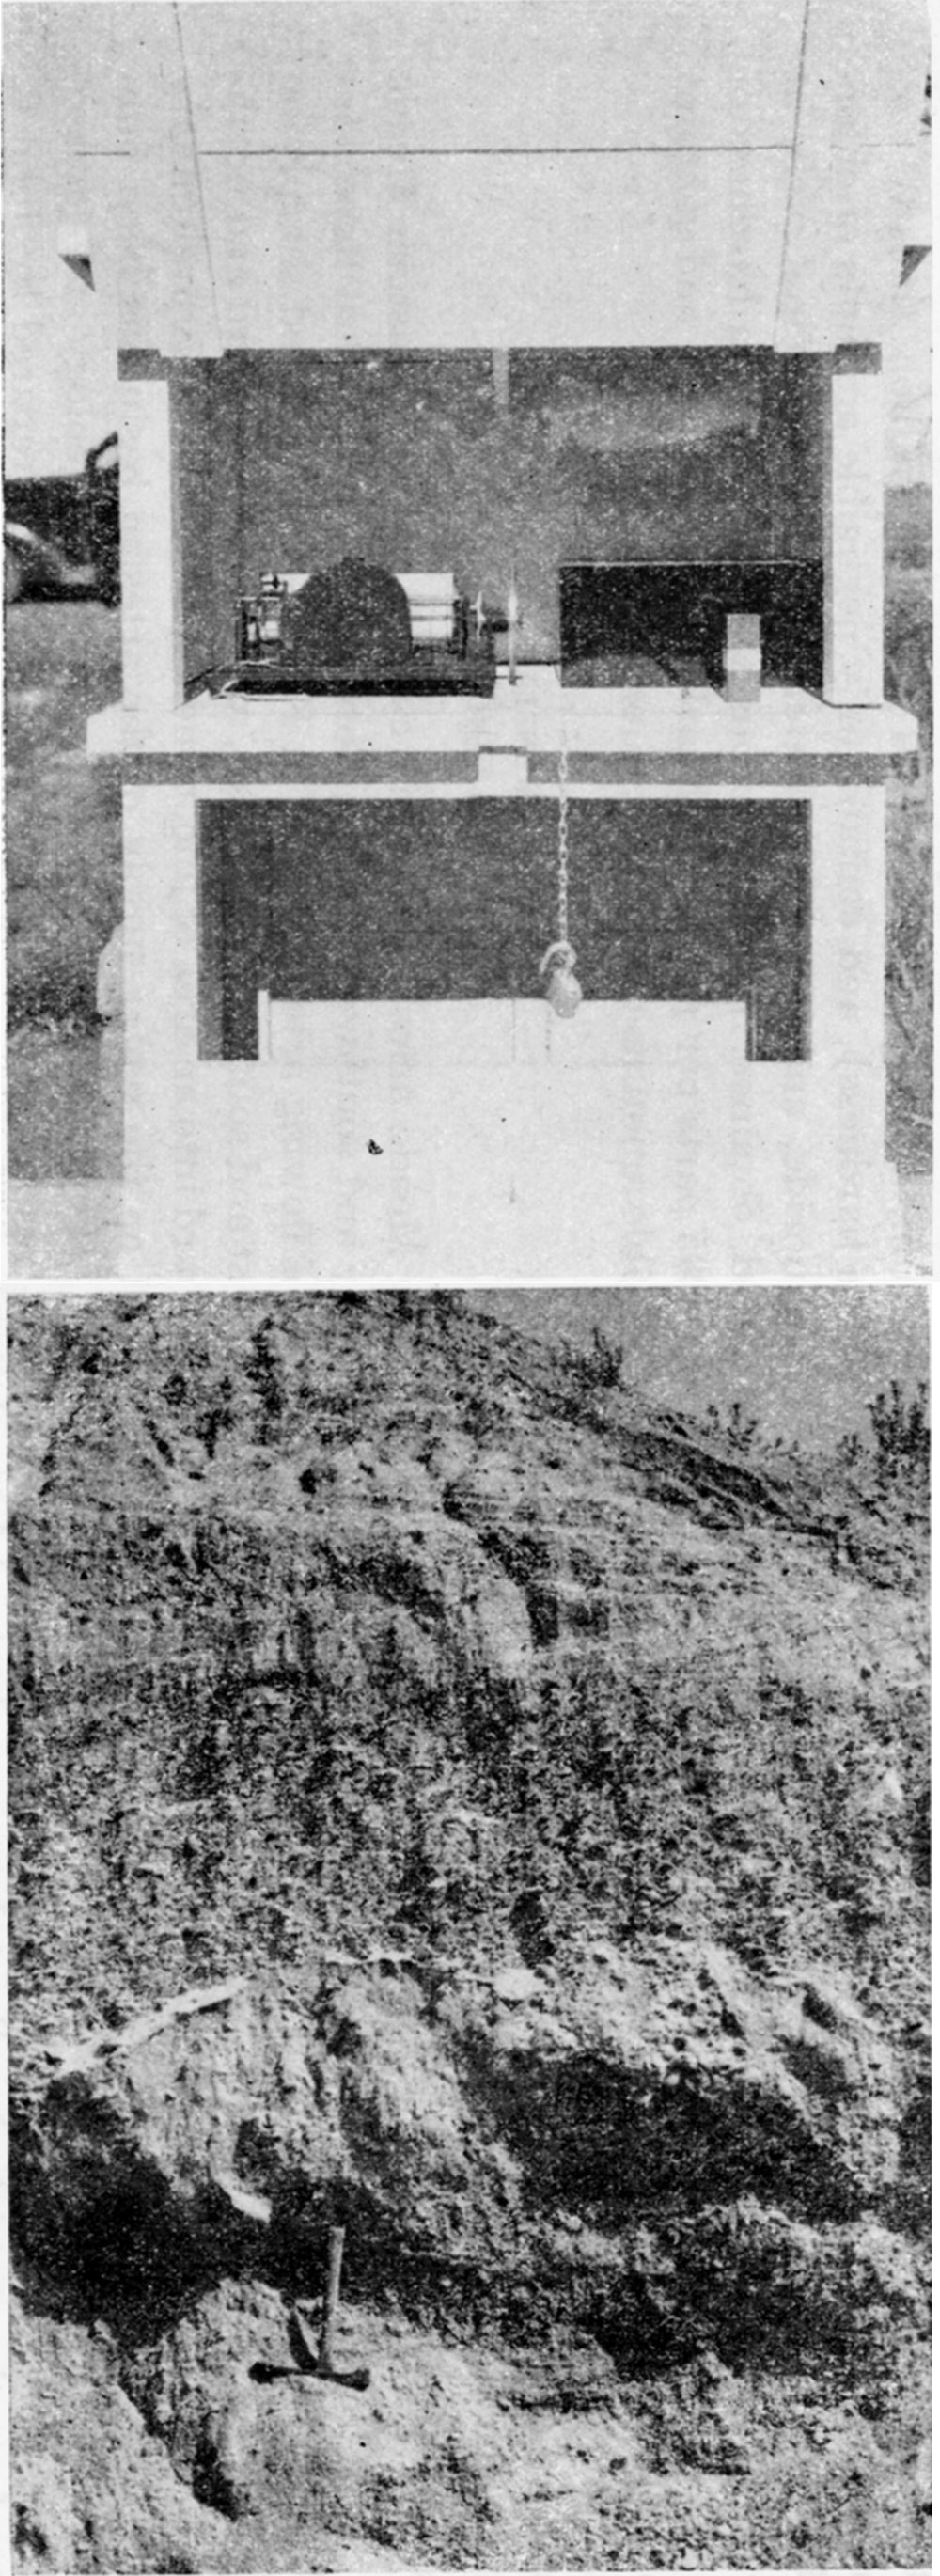 Black and white photos: upper is automatic recorder on observation well in northern Ford County; lower is exposure of coarse gravel in the Ogallala formation in Meade County.